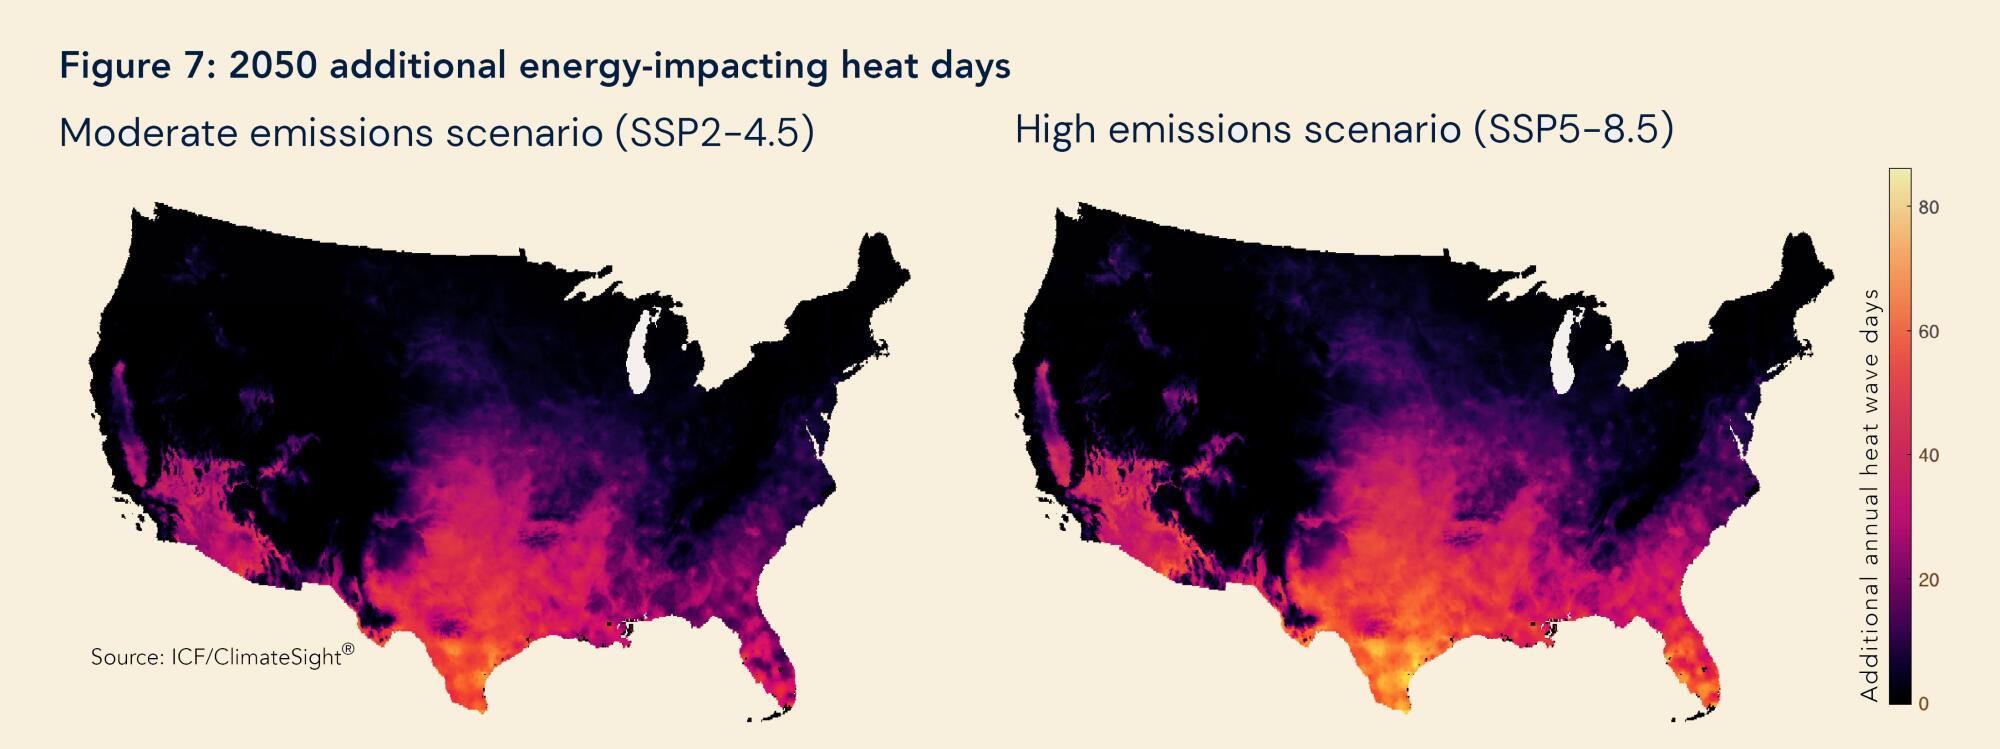 A map shows how increasing heat days could impact energy systems across the country by 2050.